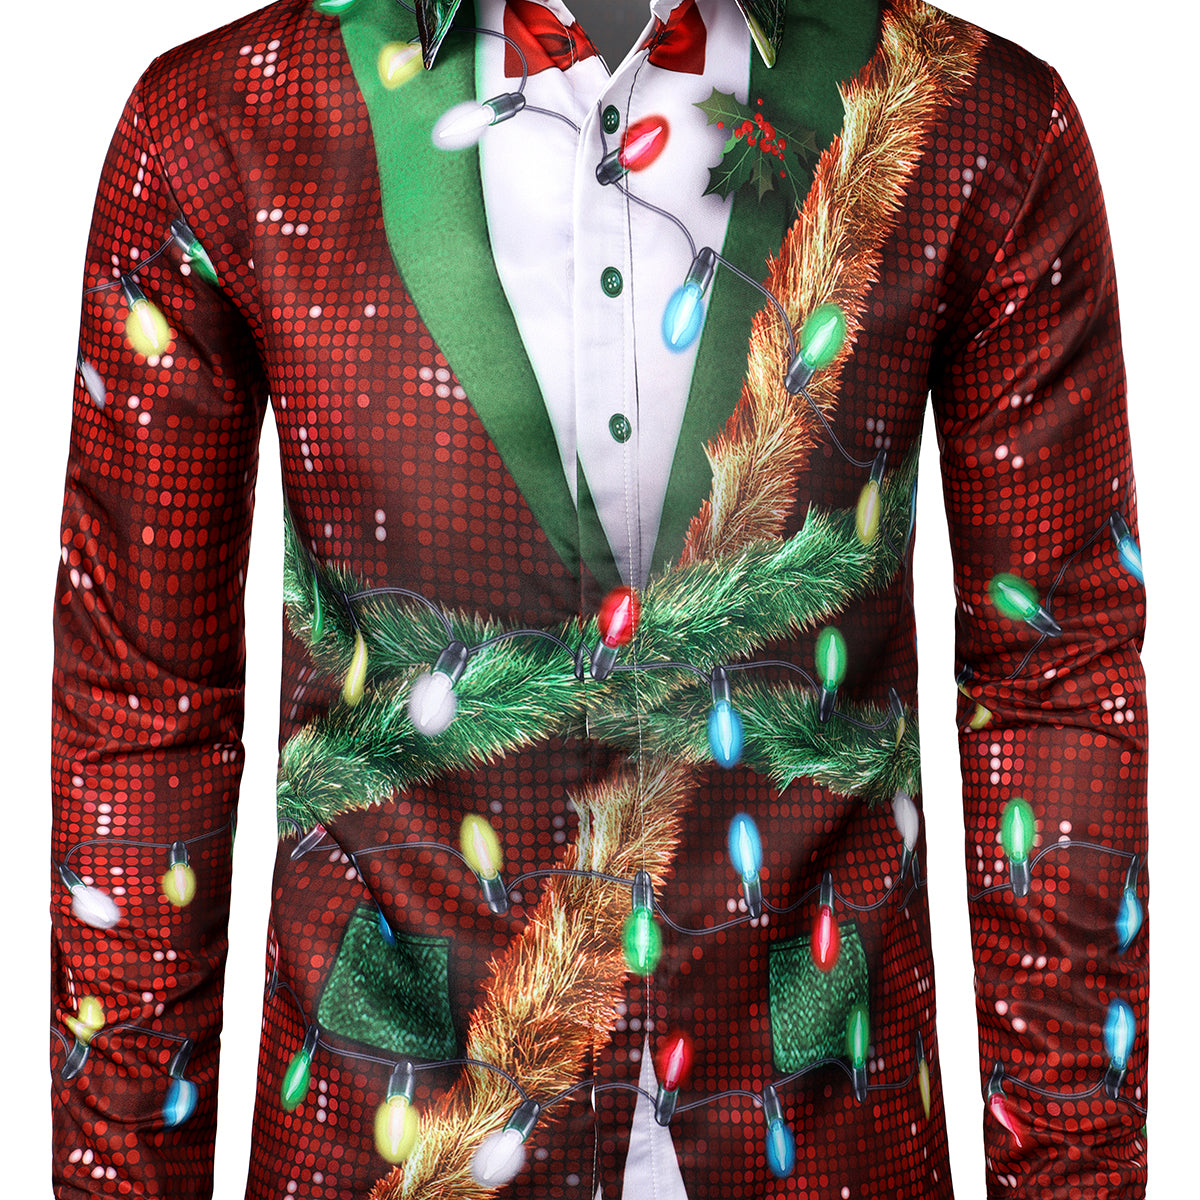 Men's Christmas Funny Outfit Themed Top Vacation Button Down Long Sleeve Dress Shirt